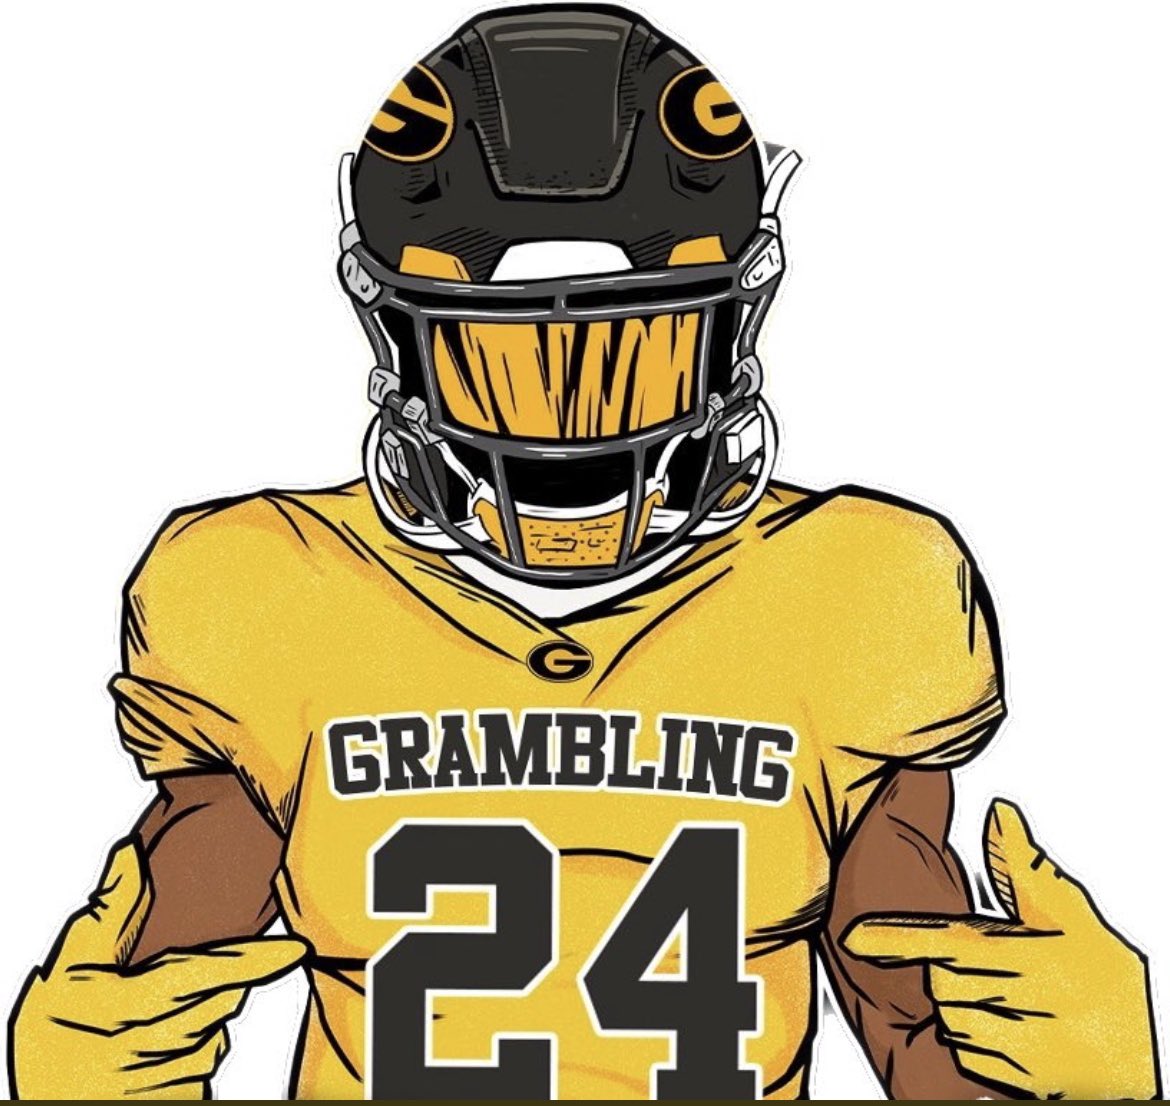 Blessed to receive my 2nd D1 offer from Grambling State University @GSUFootball01 @KrisPeters06 @coach4gib @KenAnioJr